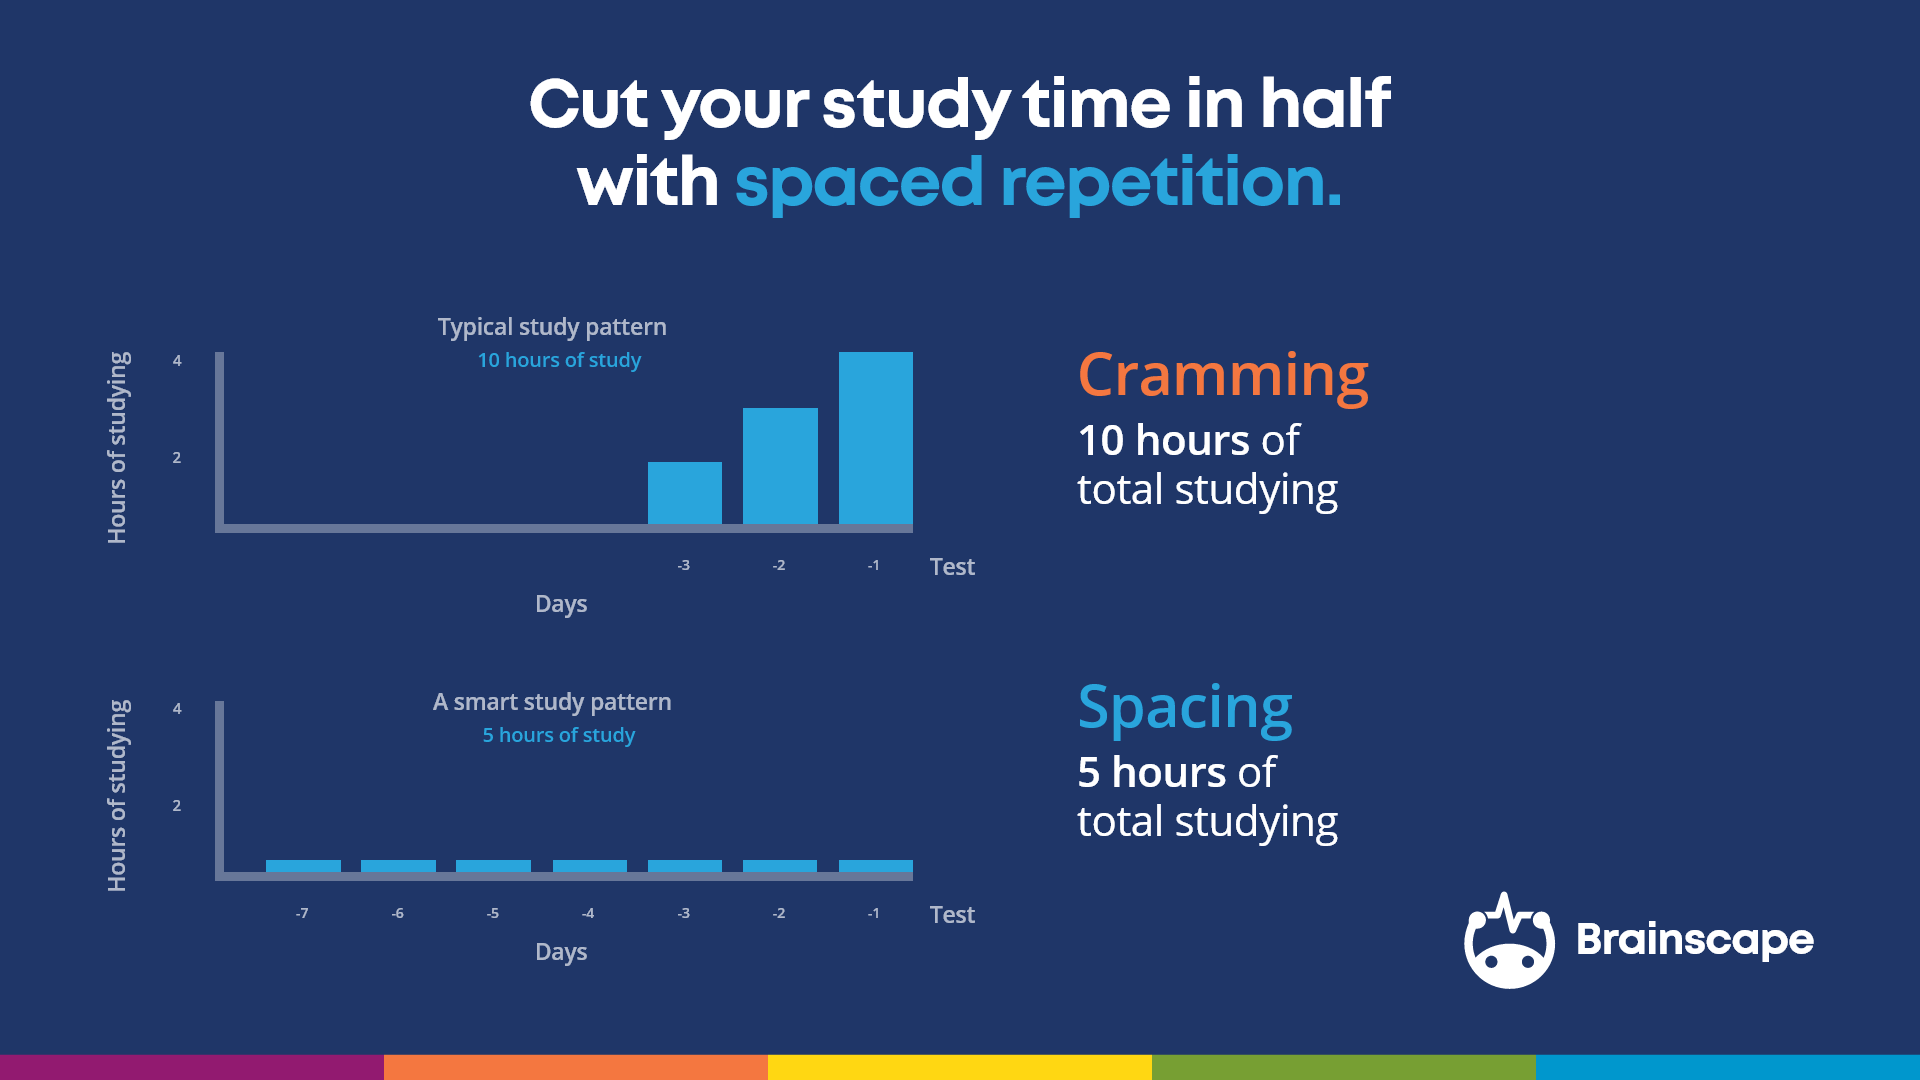 Spaced repetition cuts study time in half graphic